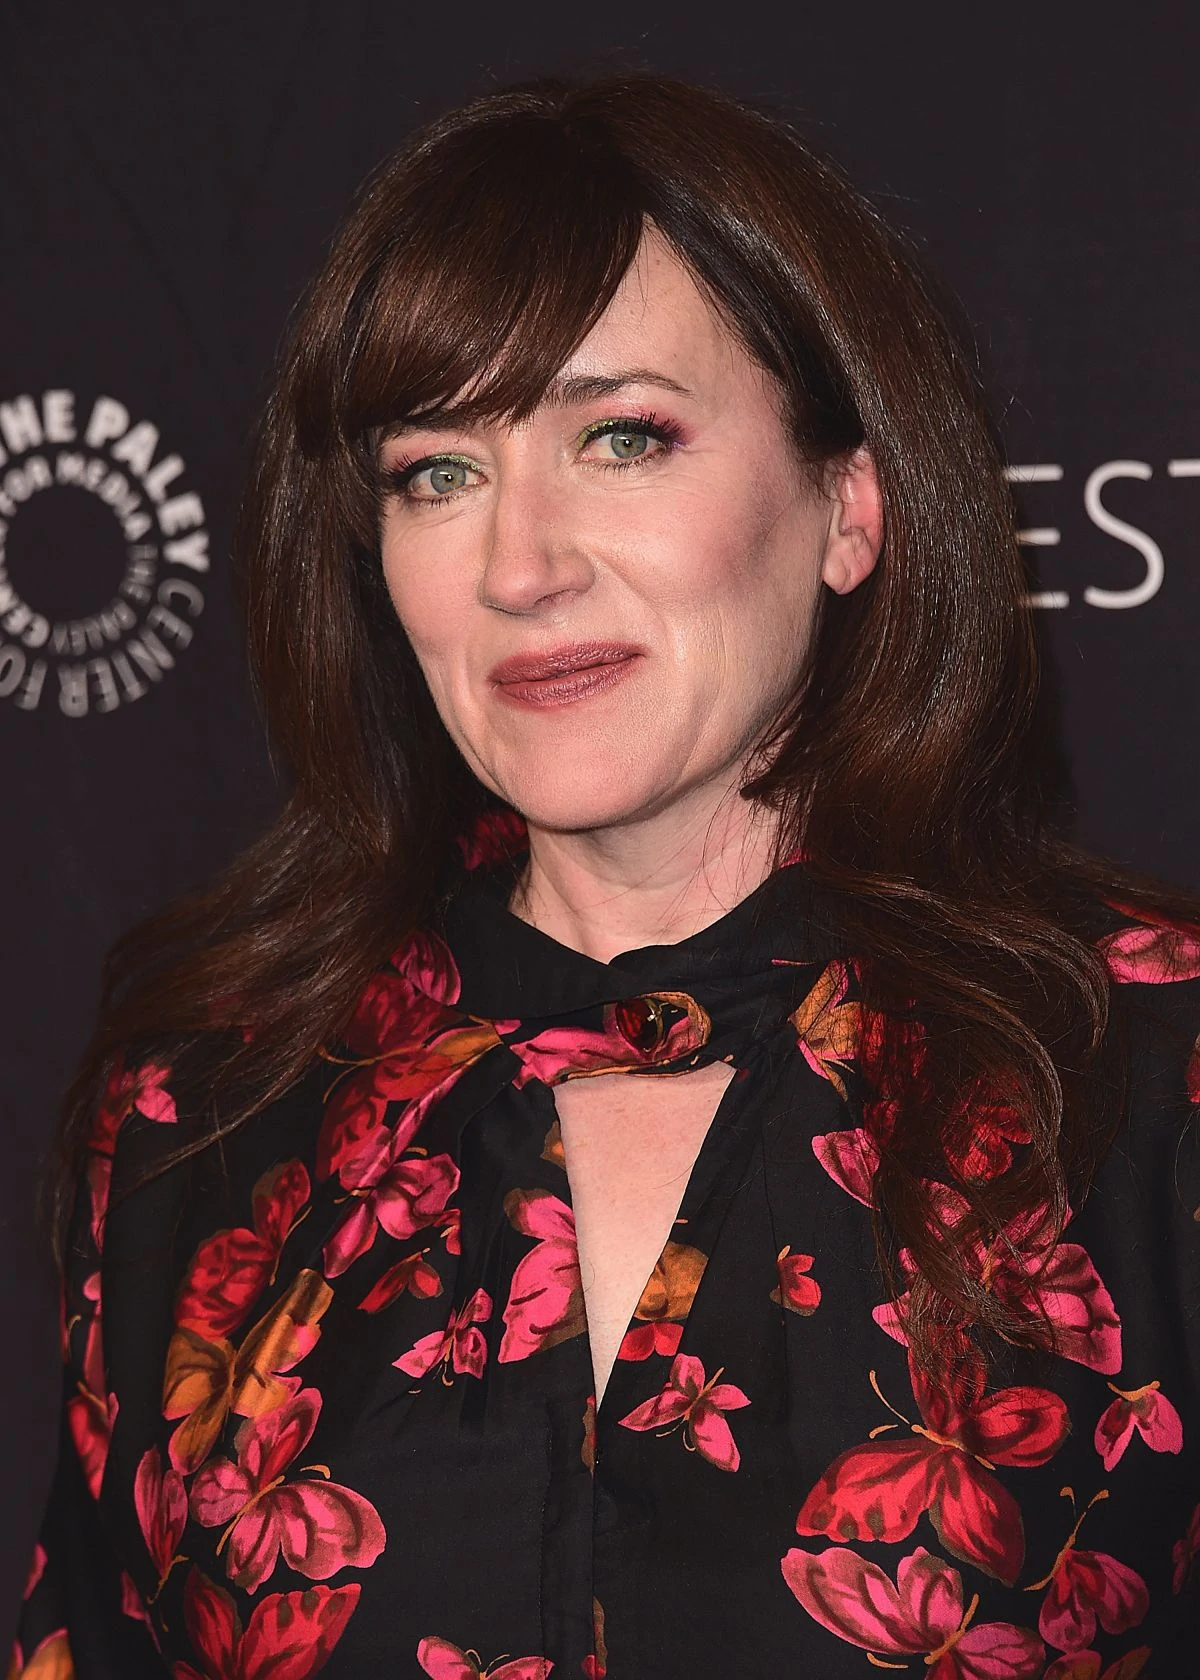 How did Maria Doyle Kennedy's acting career start